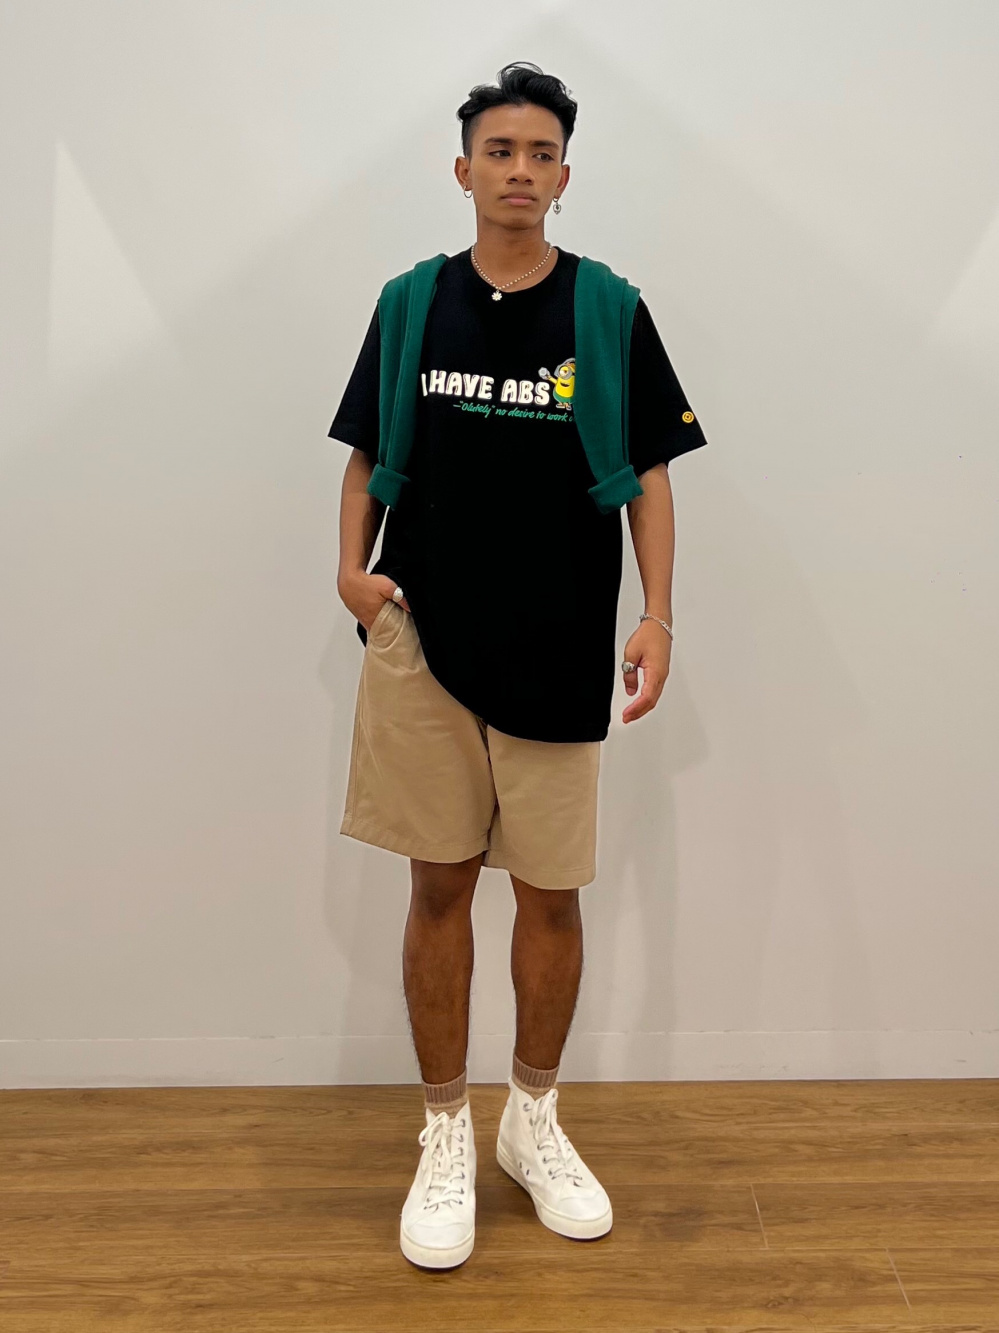 Check styling ideas for「Modal Cotton Open Collar Short Sleeve Shirt、Chino  Shorts (length 21 - 25 cm)*」